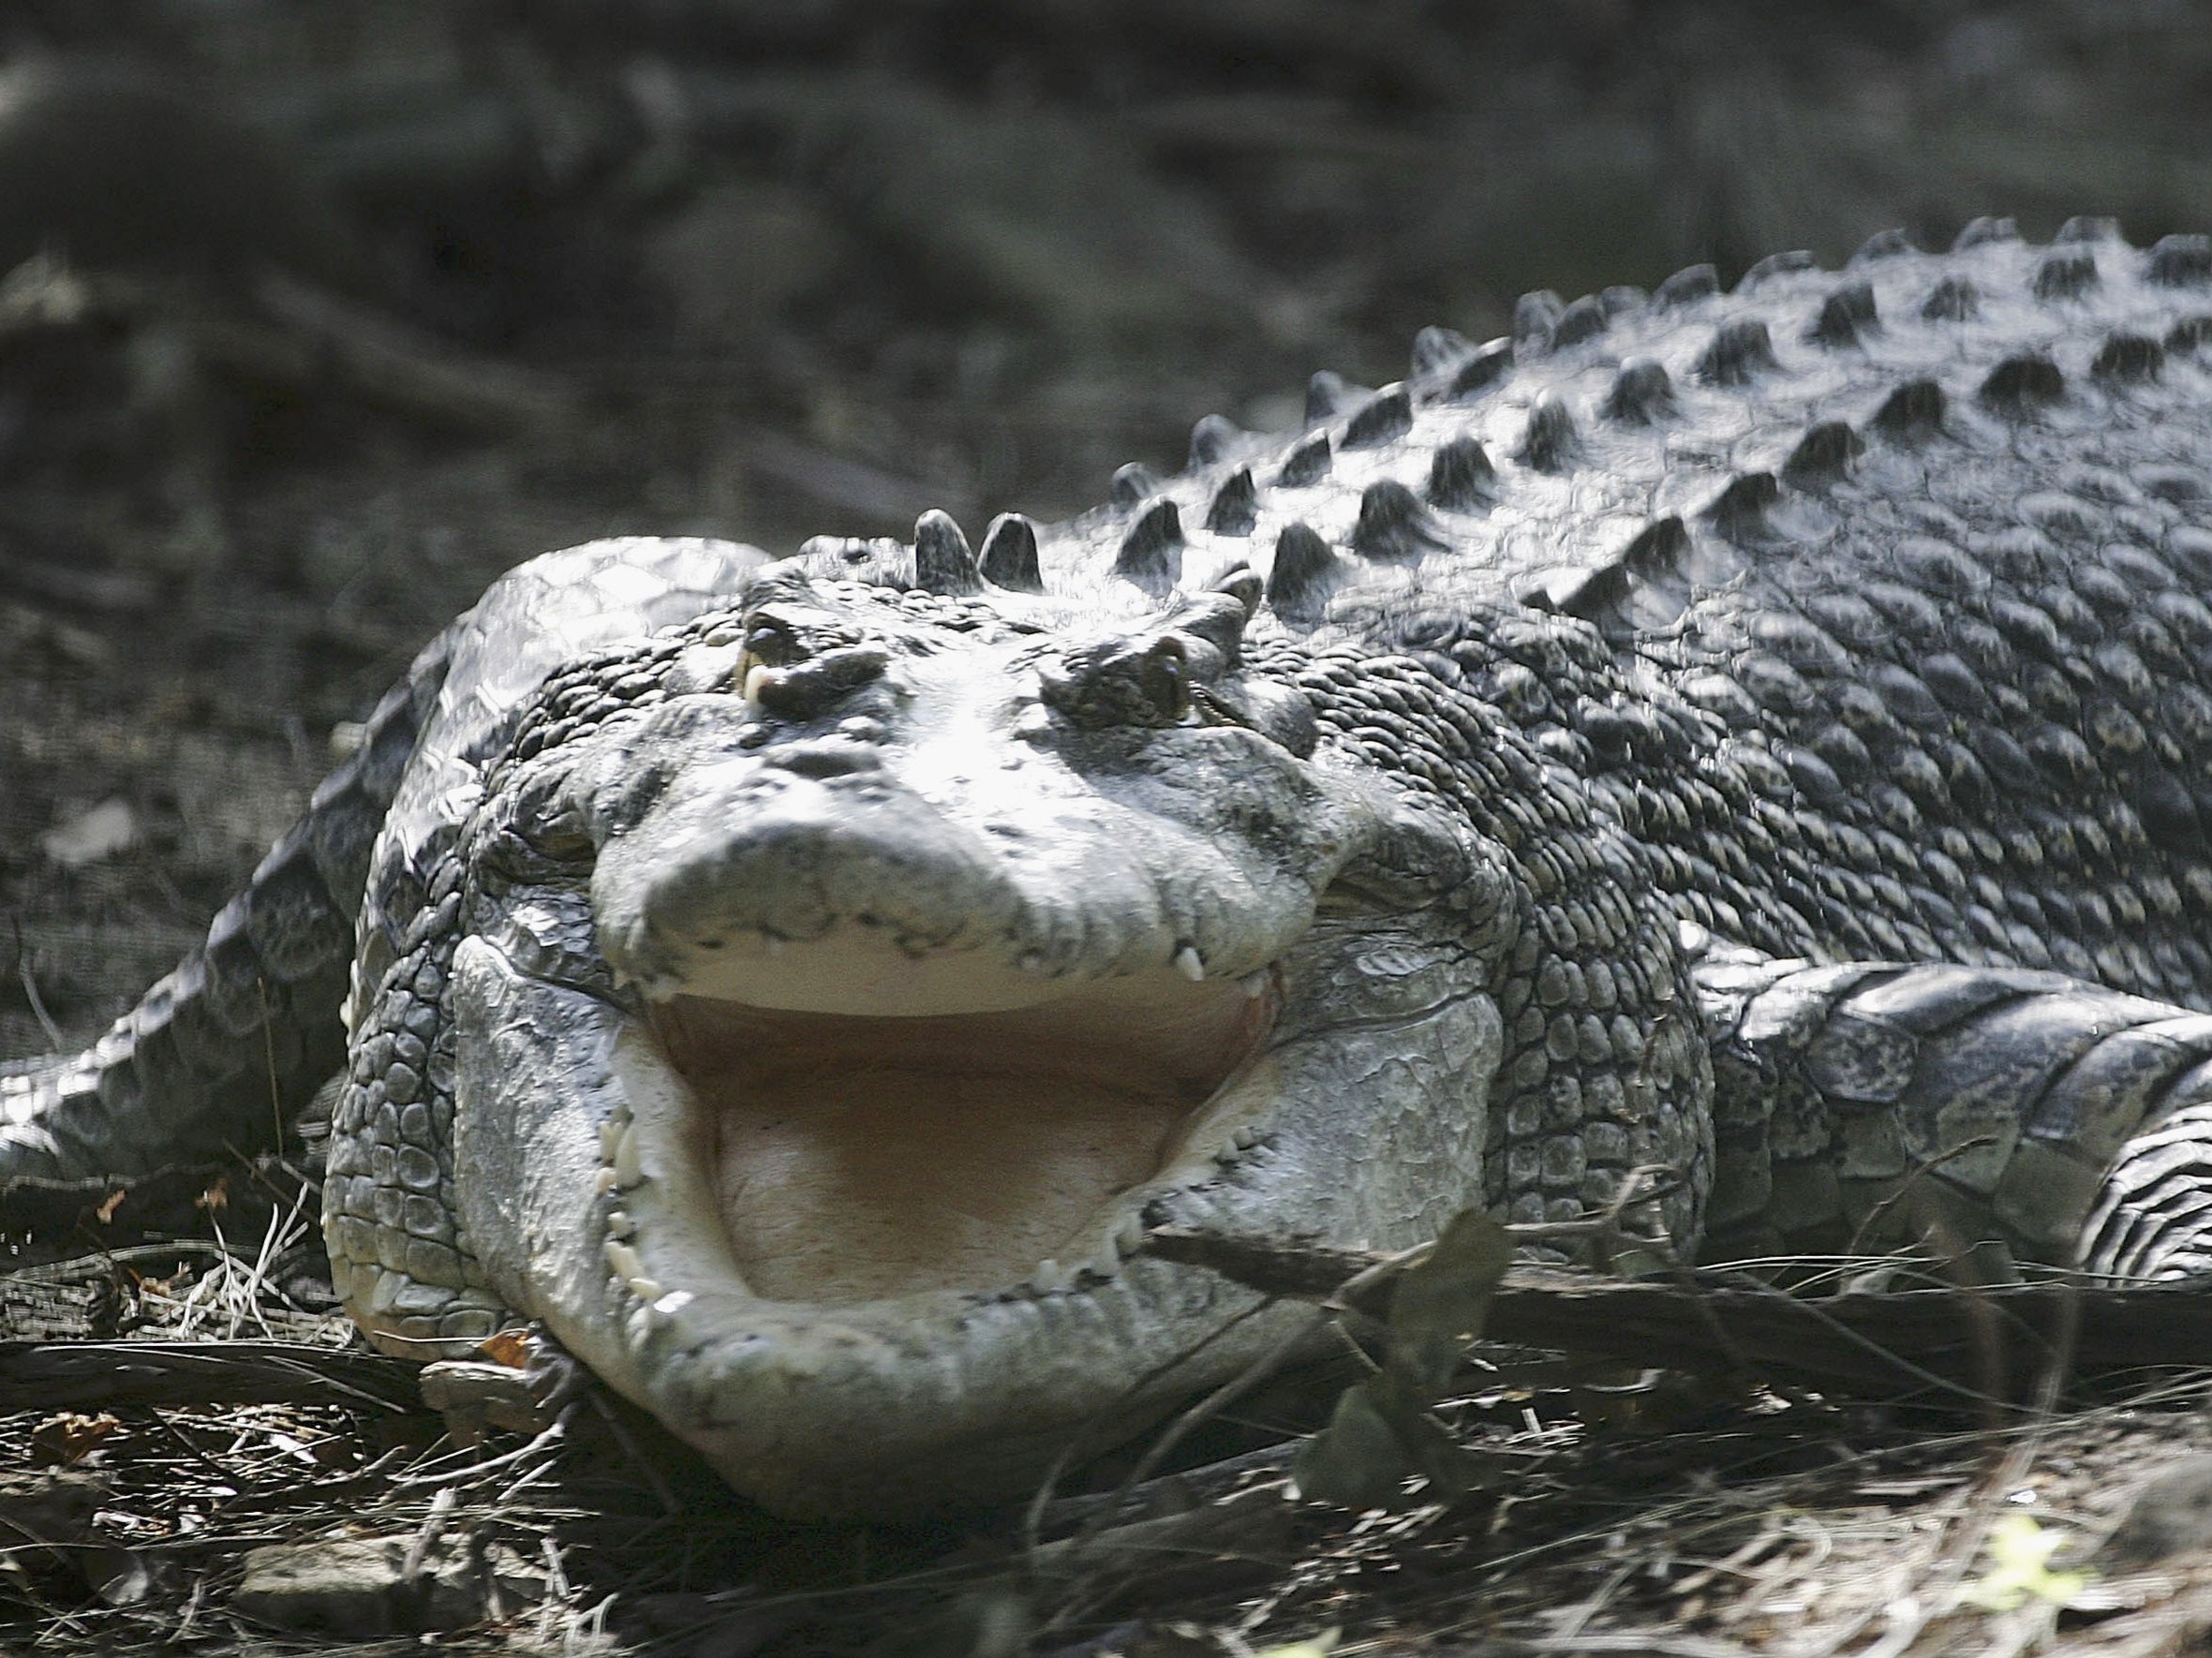 Although wild crocodiles ate extinct in Israel, there are several captive populations held as tourist attractions